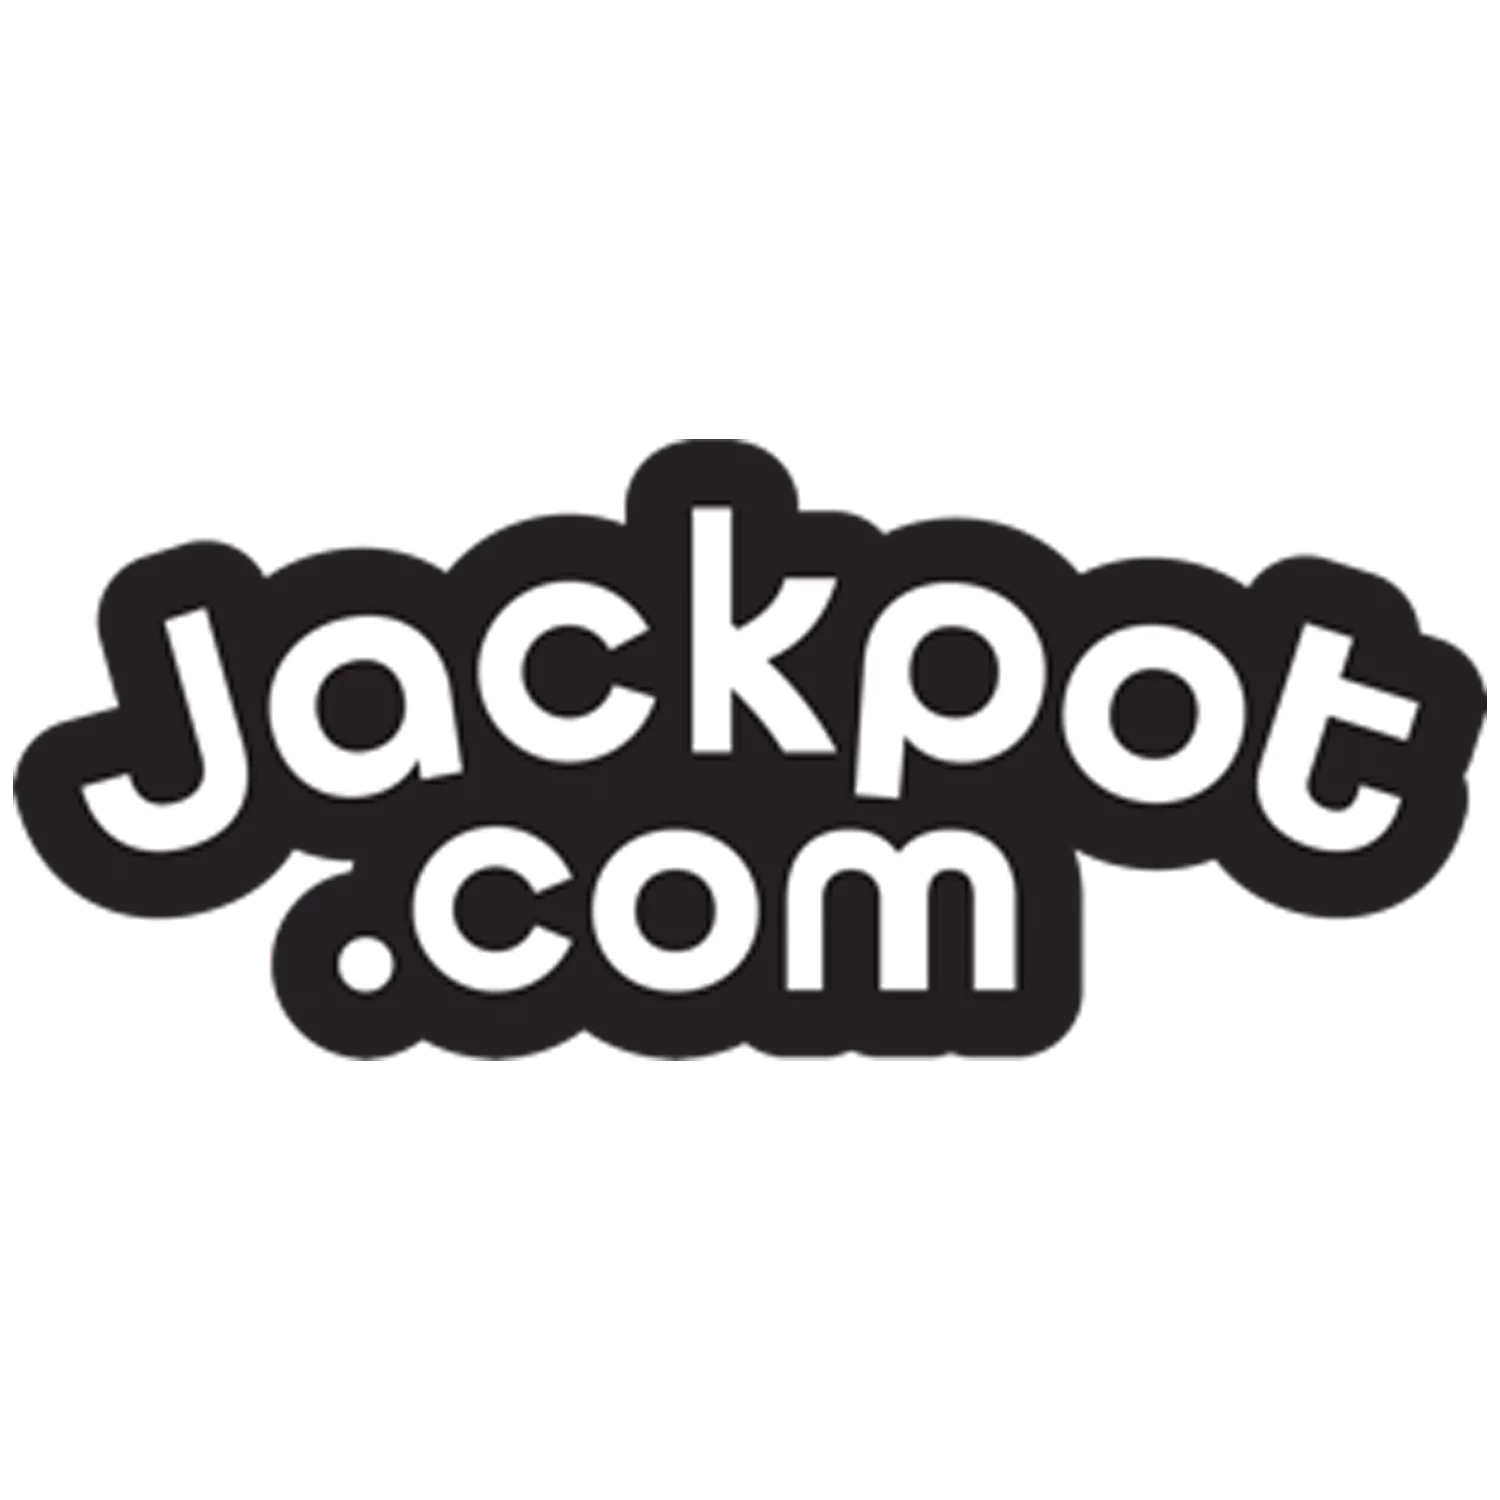 Learn what features you can receive after registration on Jackpot.com.